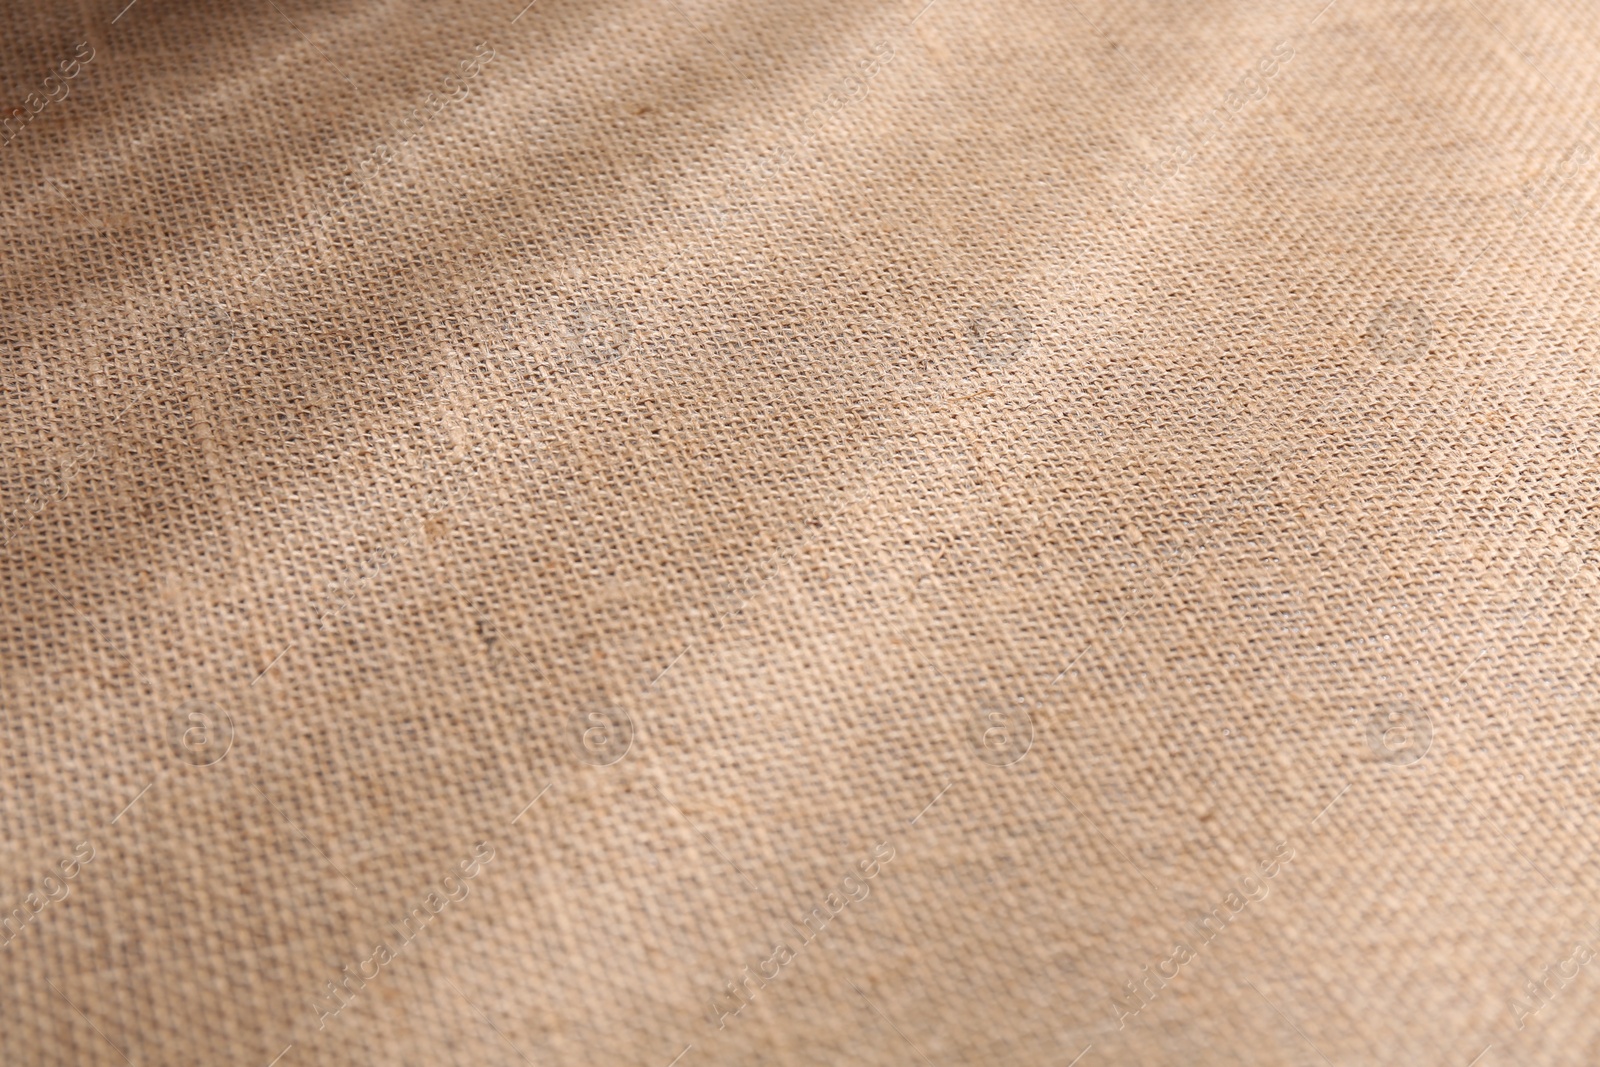 Photo of Brown burlap fabric as background, closeup view